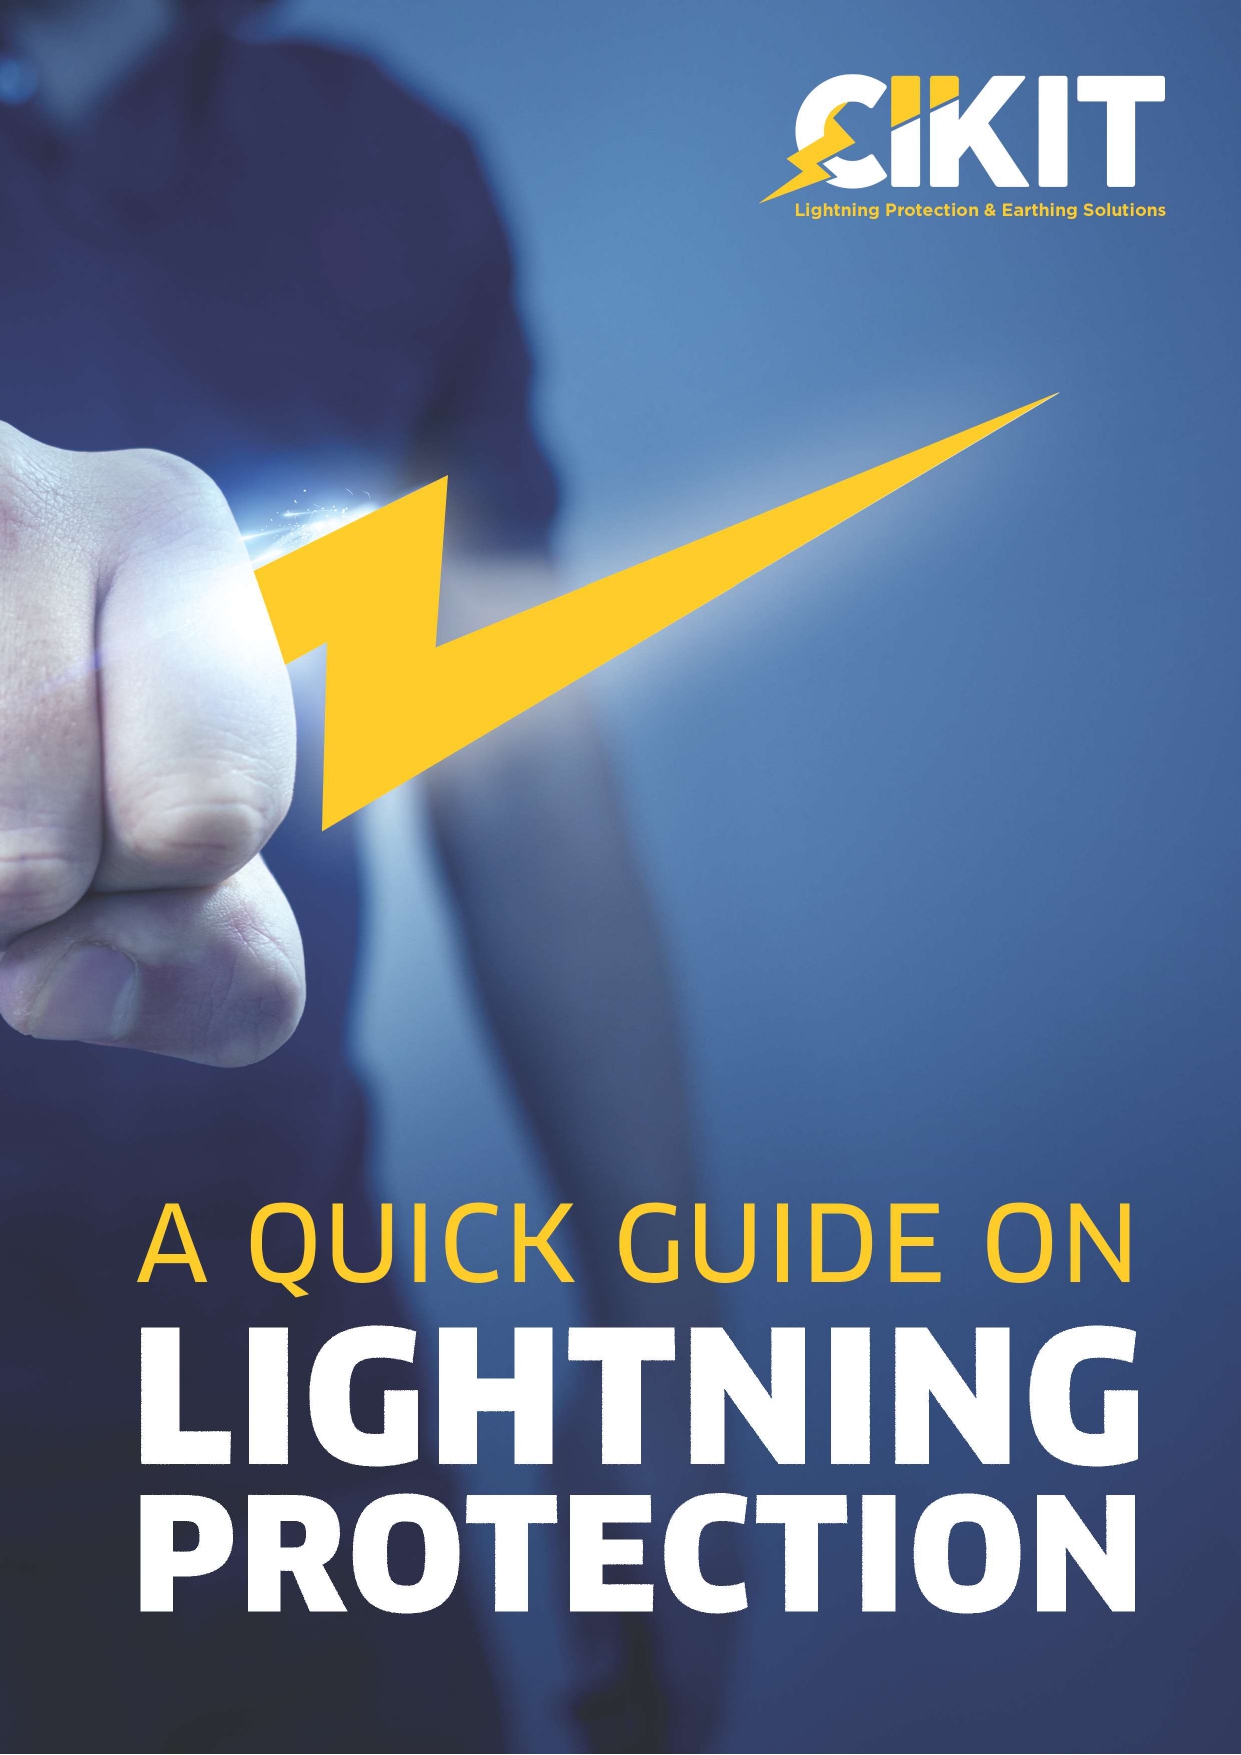 The cover page image of 'A handbook on Lightning Protection'.